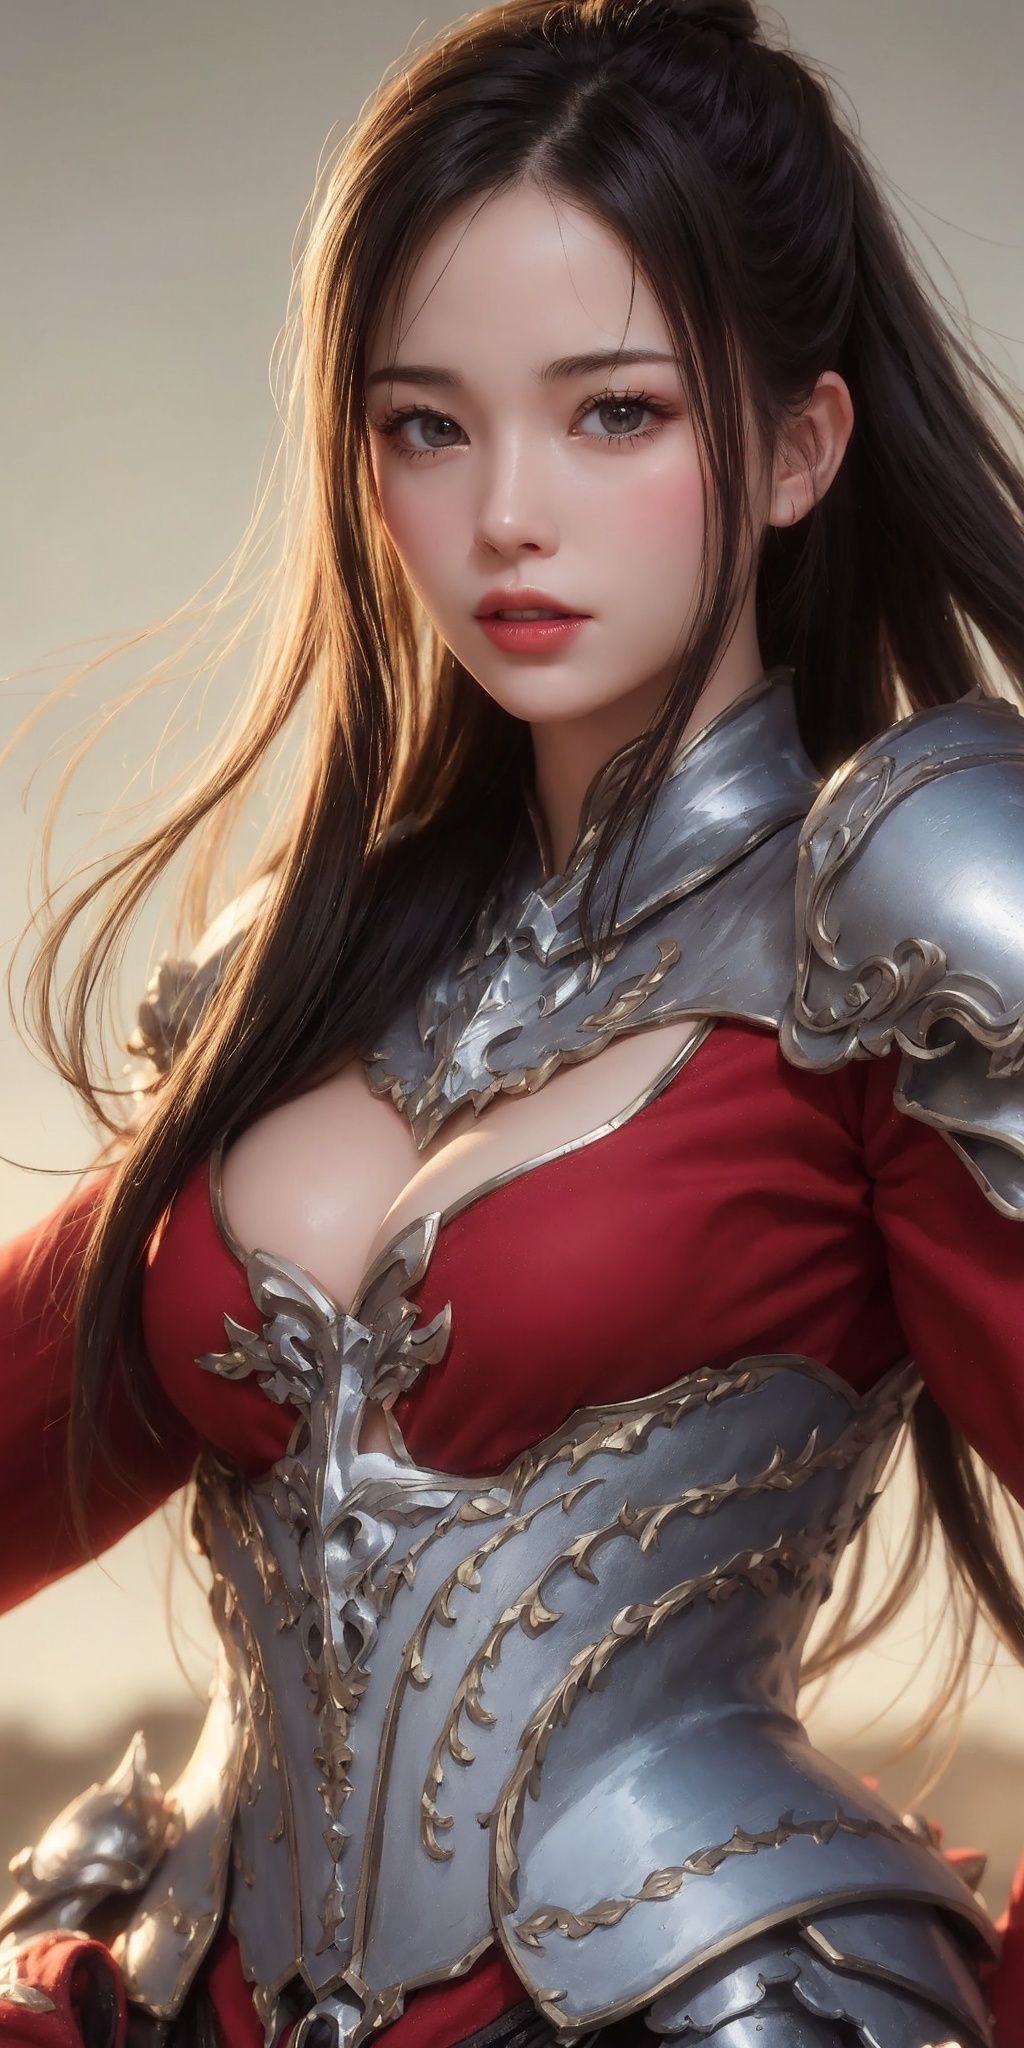 (Face close-up), (Half body photo), a girl with crystal clear skin, black high ponytail, silver armor, metal, belt, armor, armor, red cloak, wielding weapons, correct body, exquisite facial features painting, dusk, desert background, desert, wilderness, weeds, battlefield, sandstorm, desolation, strong and resolute expression, eyes, light, glimmer